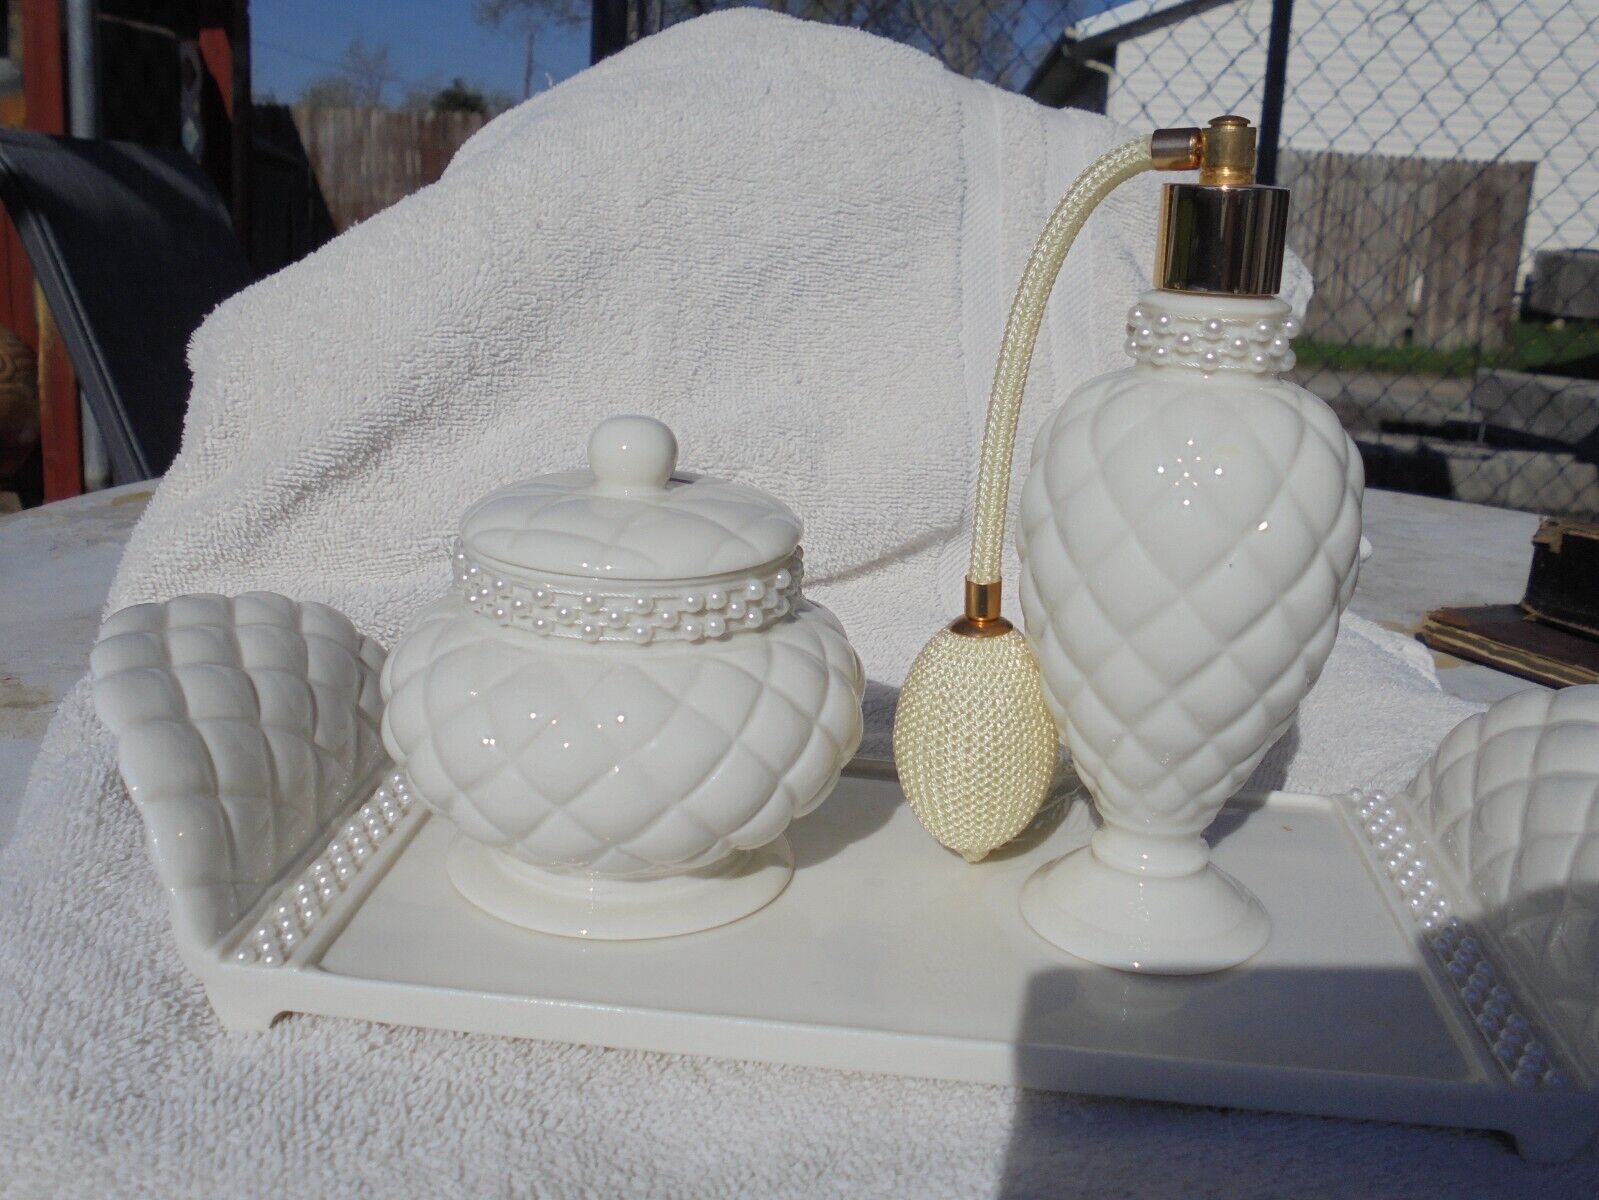 Vintage 3 Pc. Vanity Set White Quilted Ceramic w/ Faux Pearls